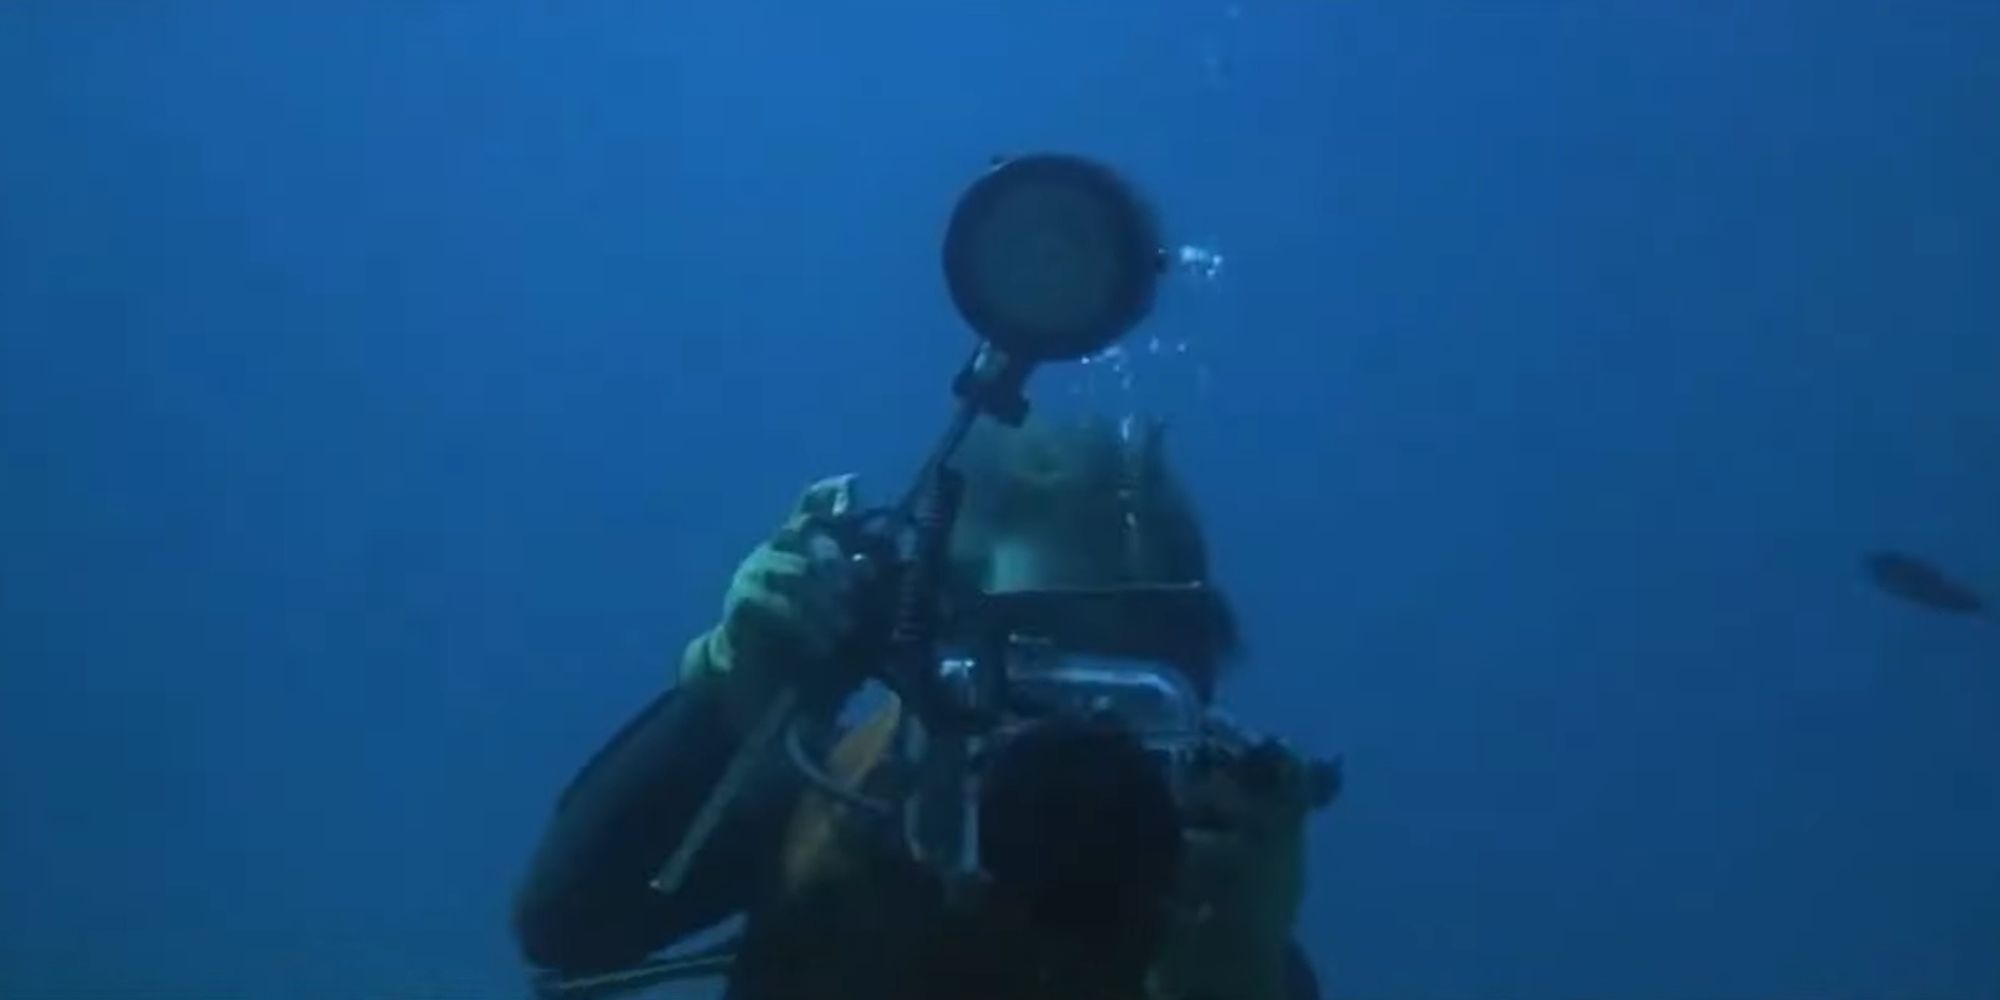 Scuba diver taking pictures underwater in Jaws 2